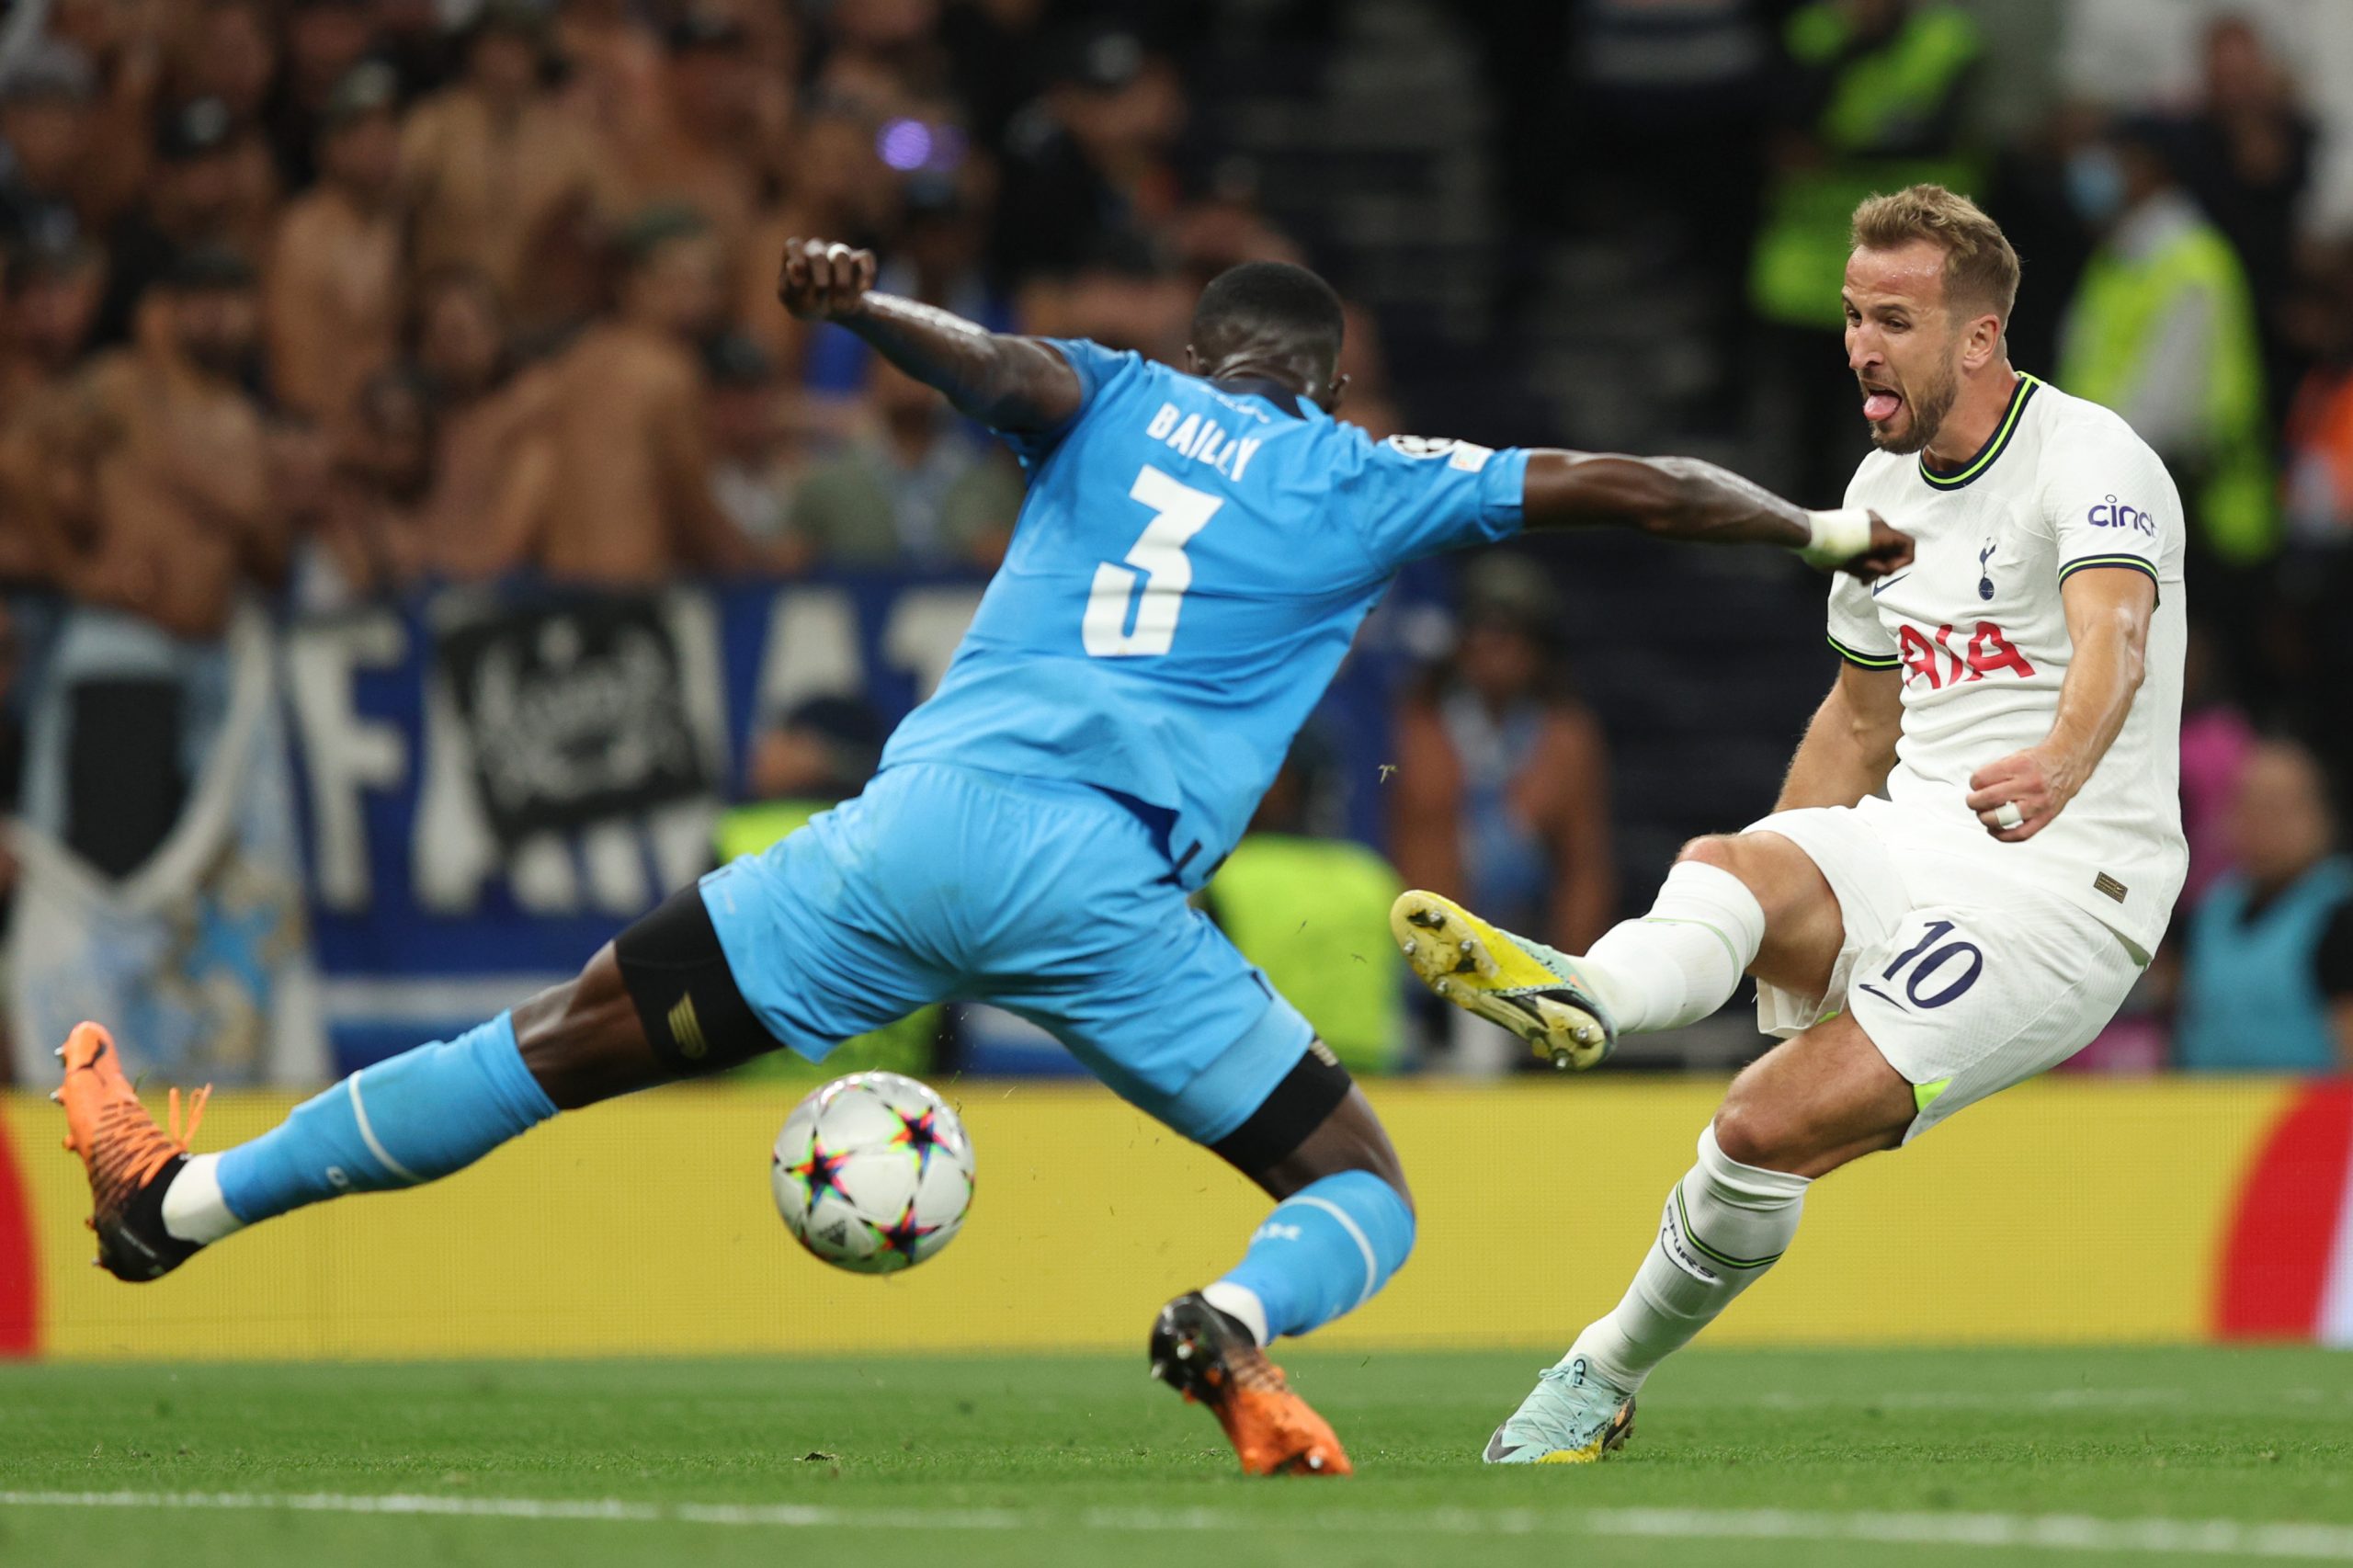 Harry Kane of Tottenham Hotspur tries to take a shot past Eric Bailly of Olympique de Marseille.